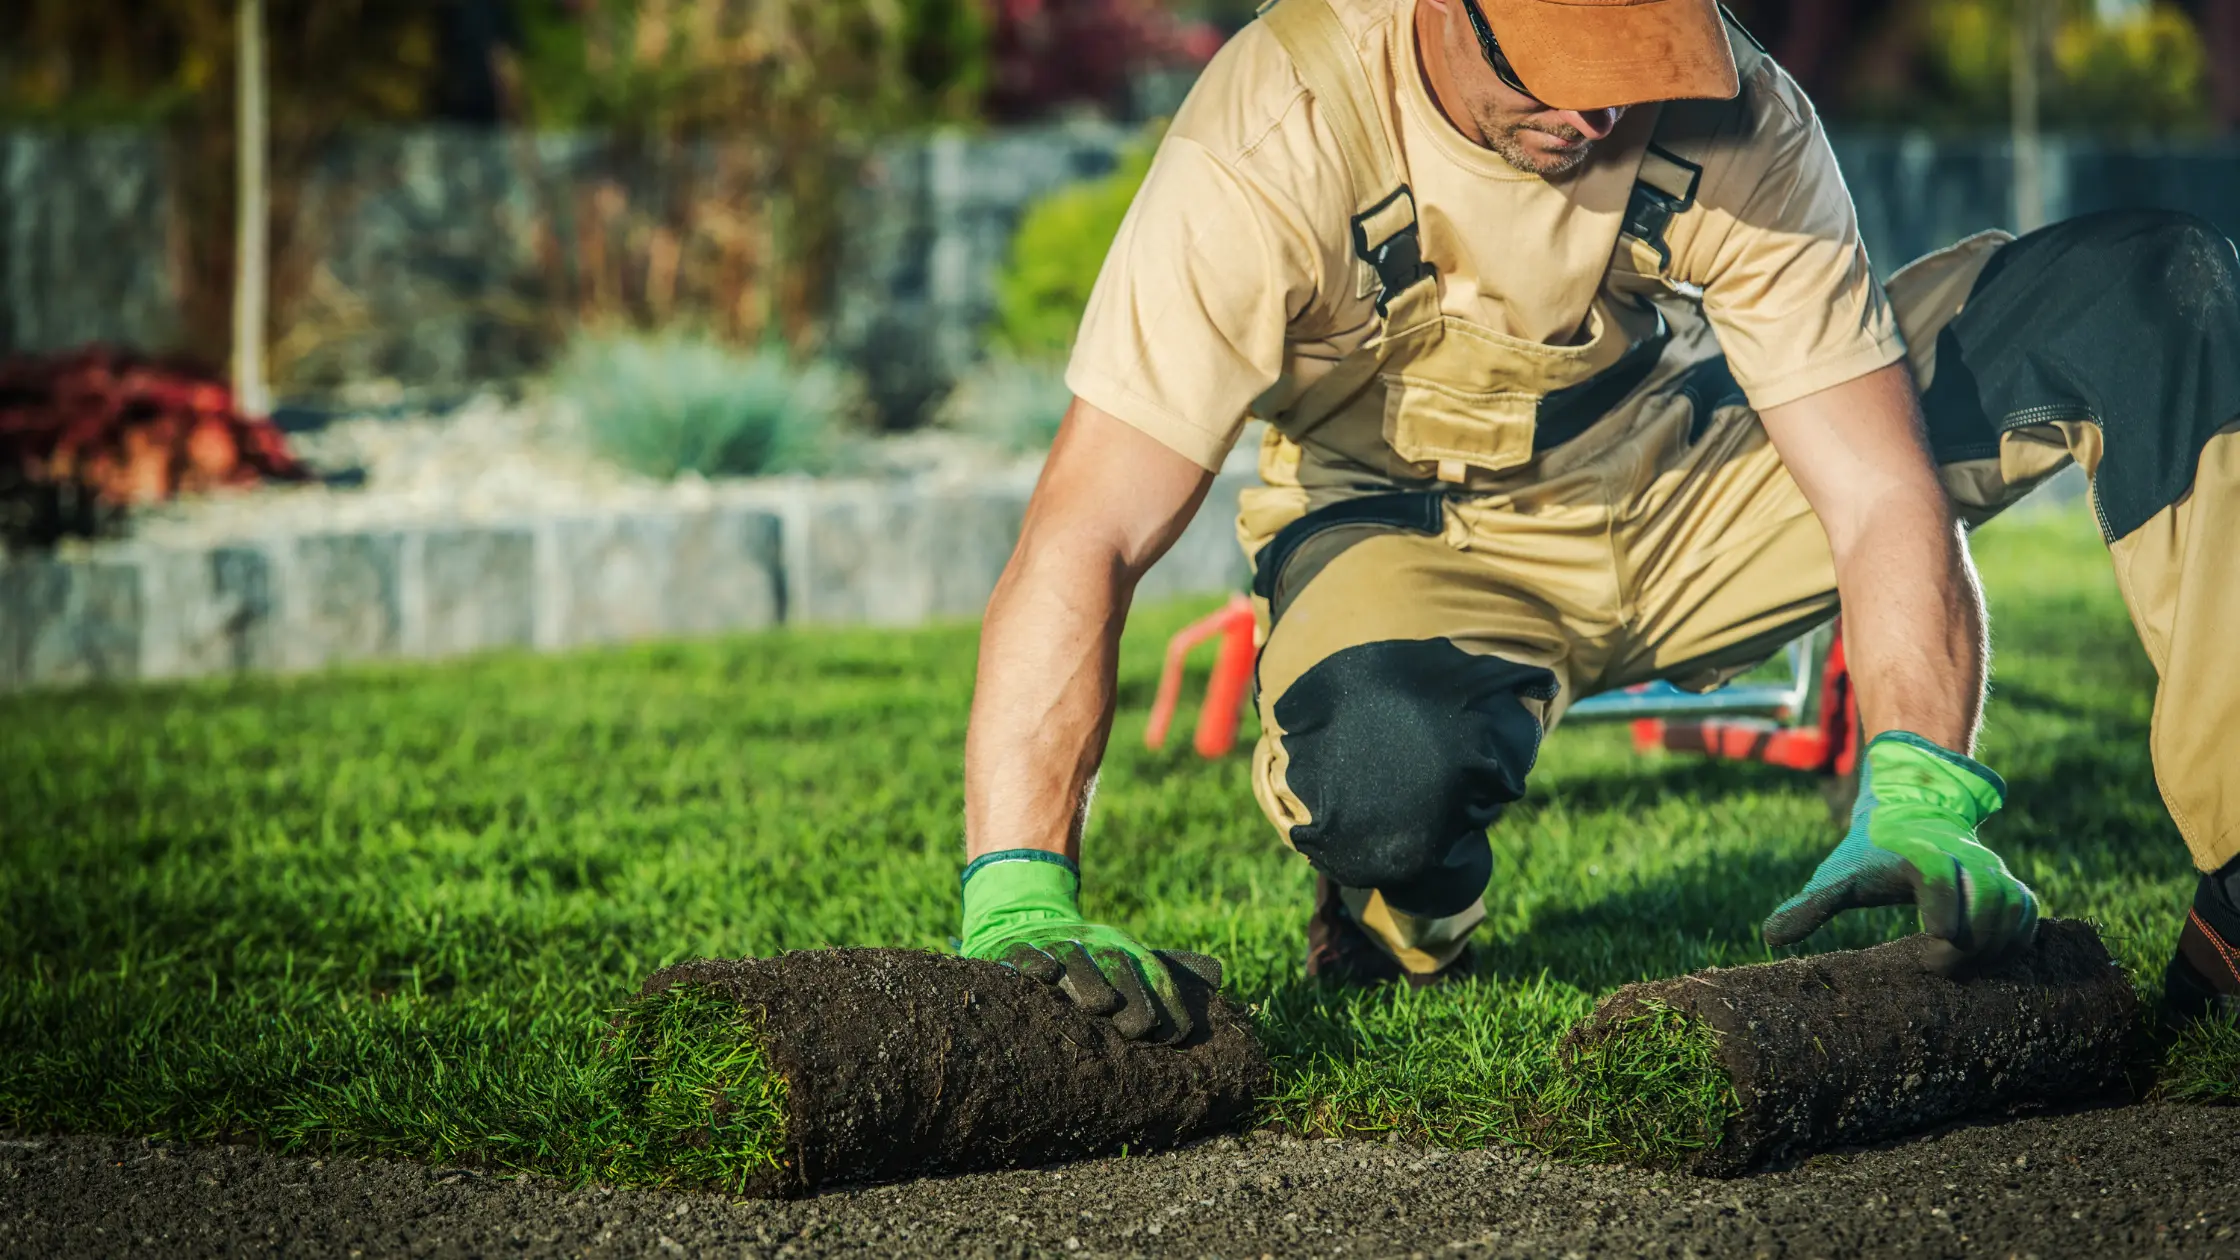 Landscaping Business Ideas